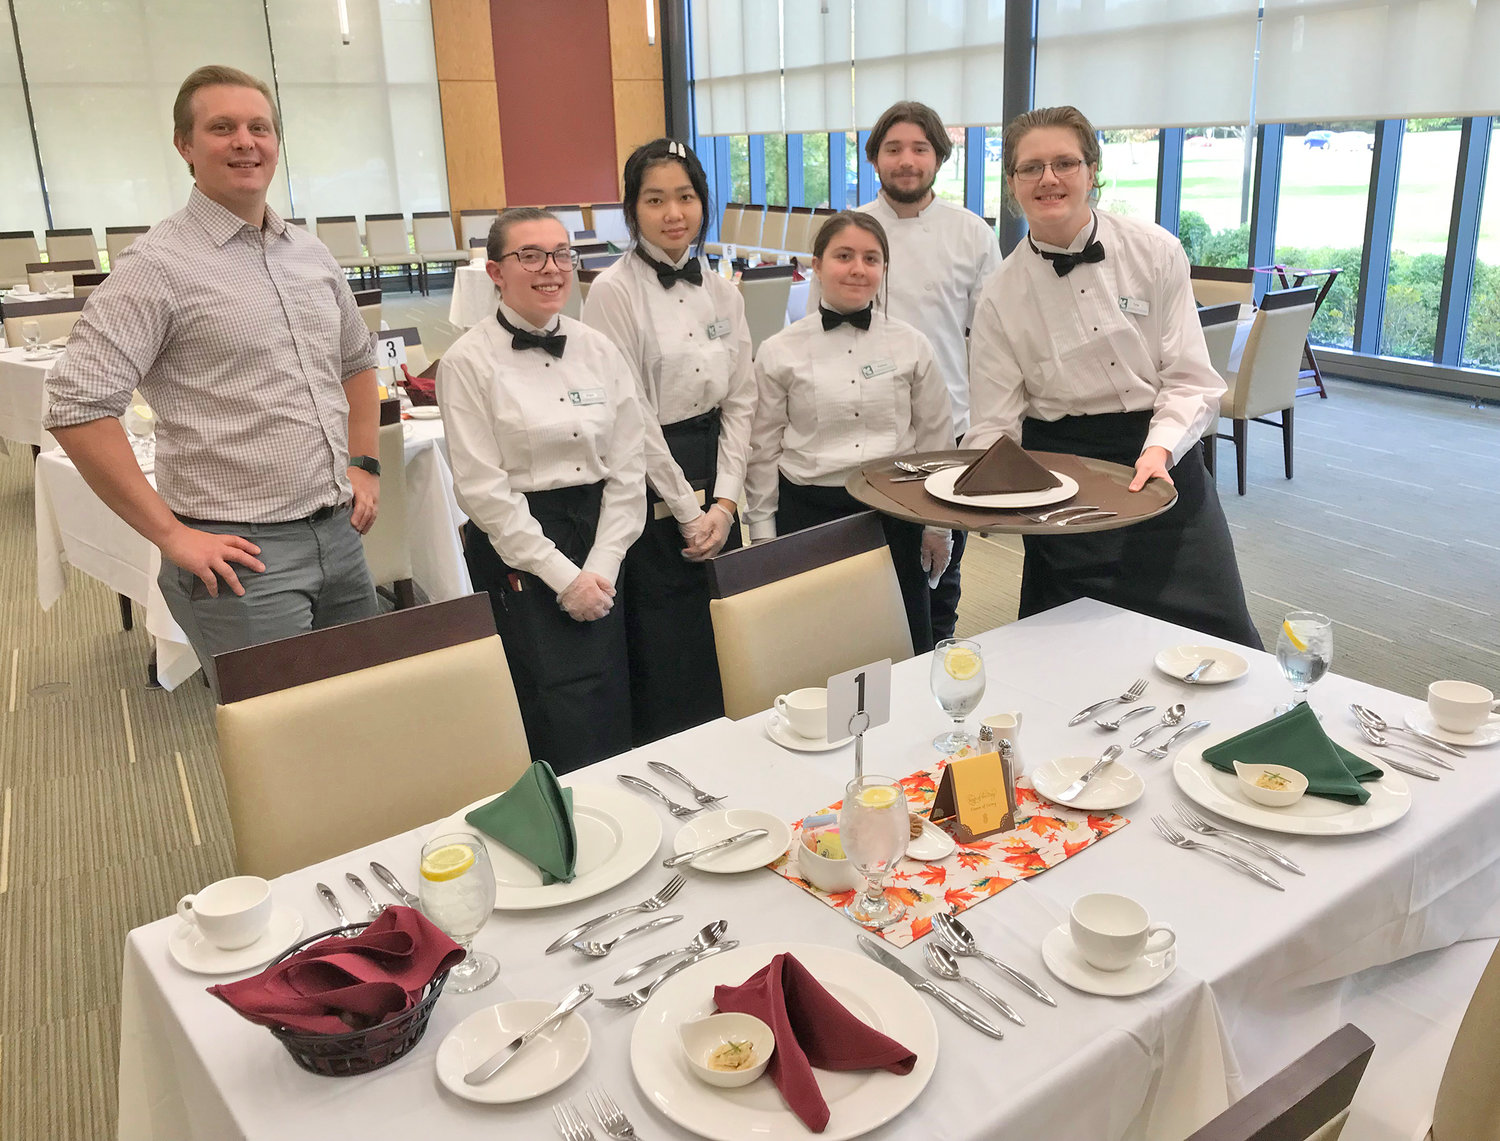 Mohawk Valley Community College hospitality program Director Vincent Petronio, left, and students, from left, Angel Lamb, Moolay Shee, Raelynn Briggs, Zach Getz and Tyler Hall invite the public out to the campus Wednesdays through Nov. 16 for gourmet luncheons prepared and served by the students themselves.